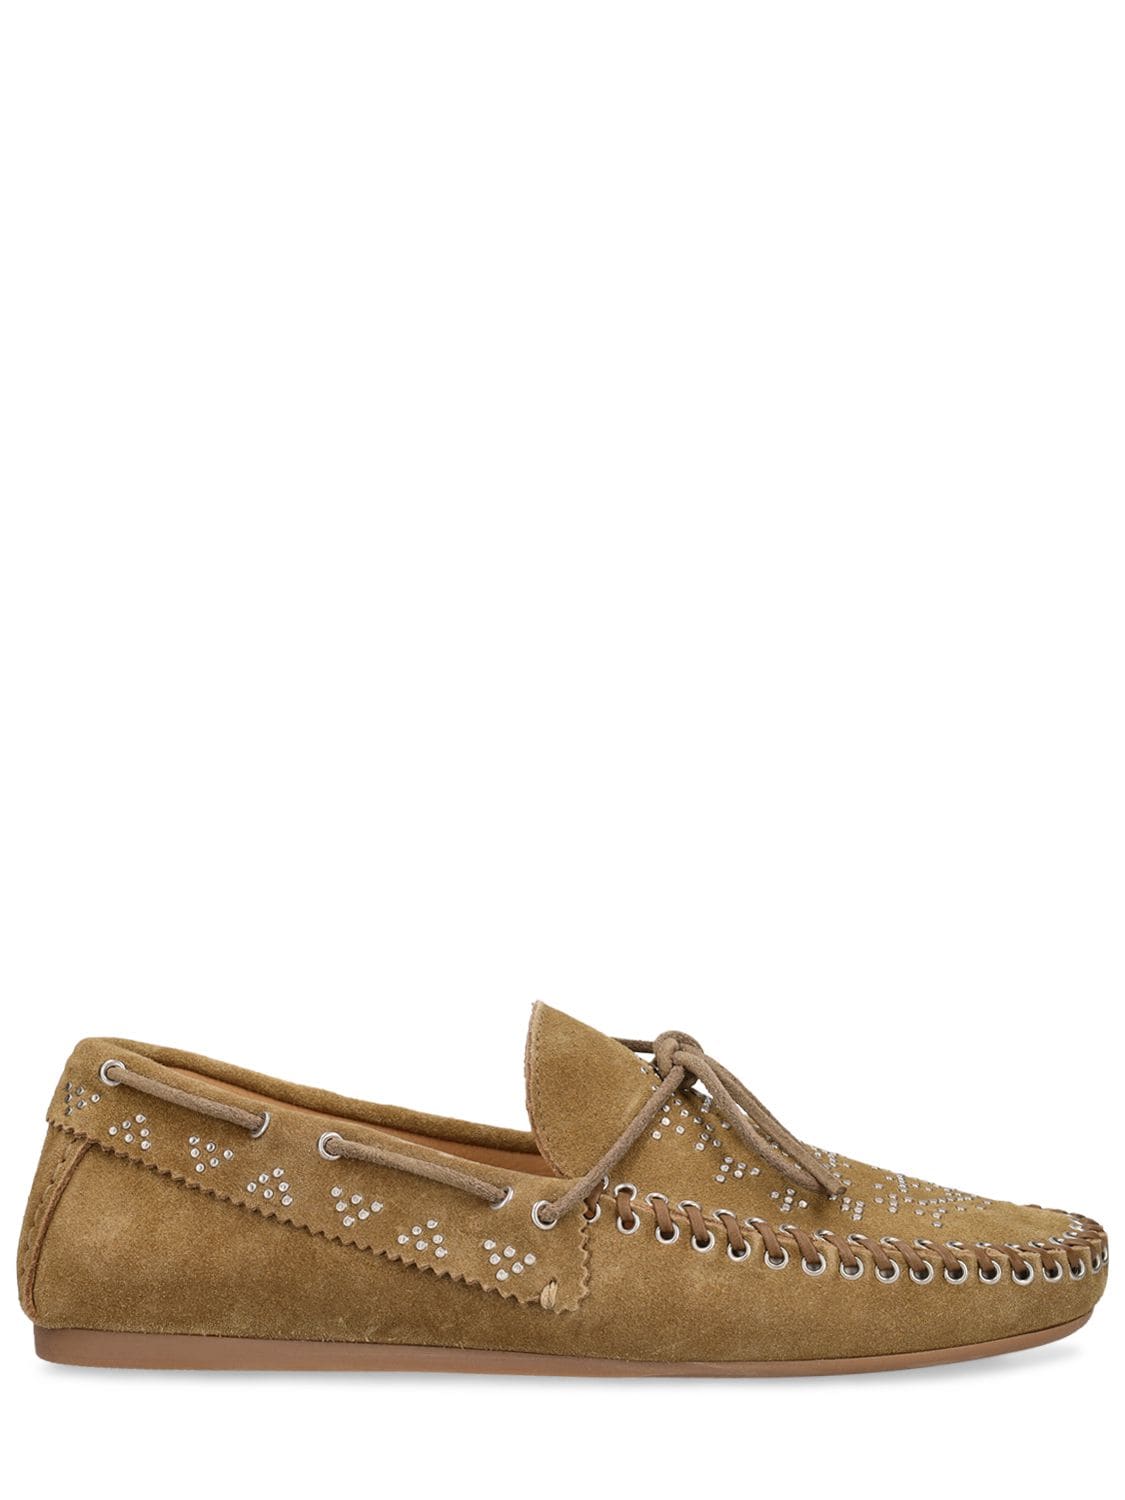 Image of 10mm Freen-gb Studded Suede Loafers